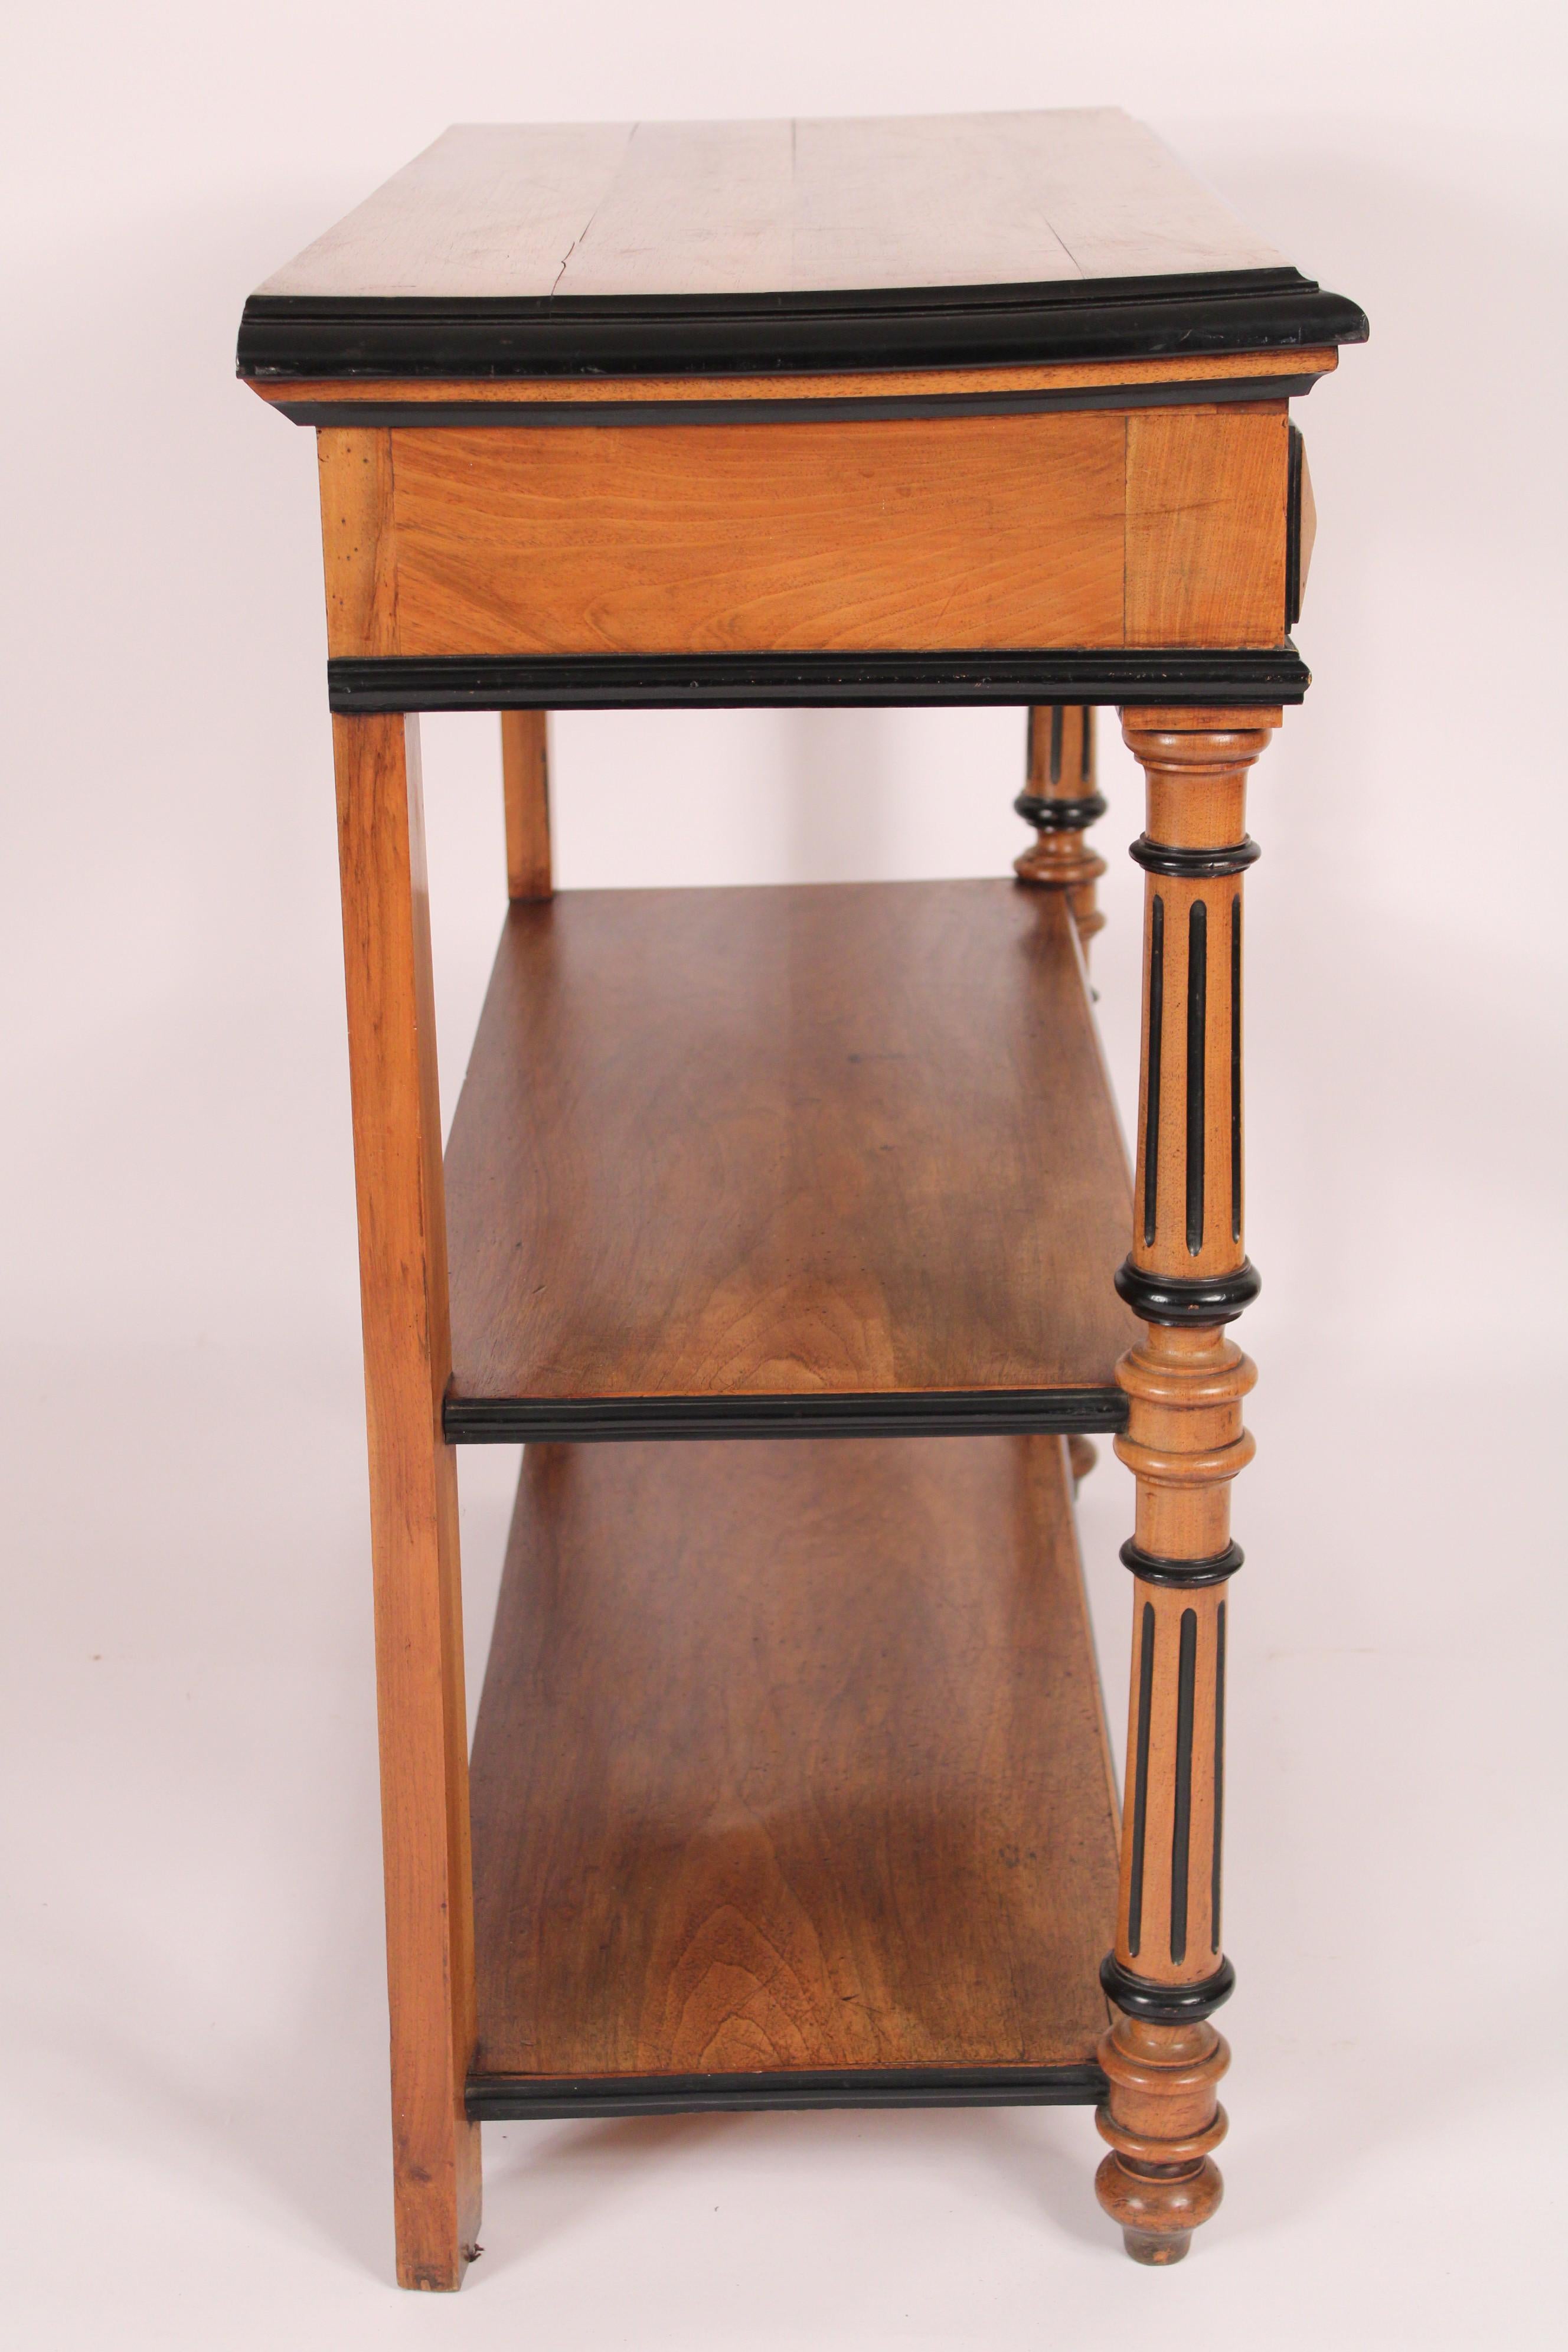 Brass Antique Napoleon III Style Walnut and Black Lacquer Etagere / Dry Bar For Sale